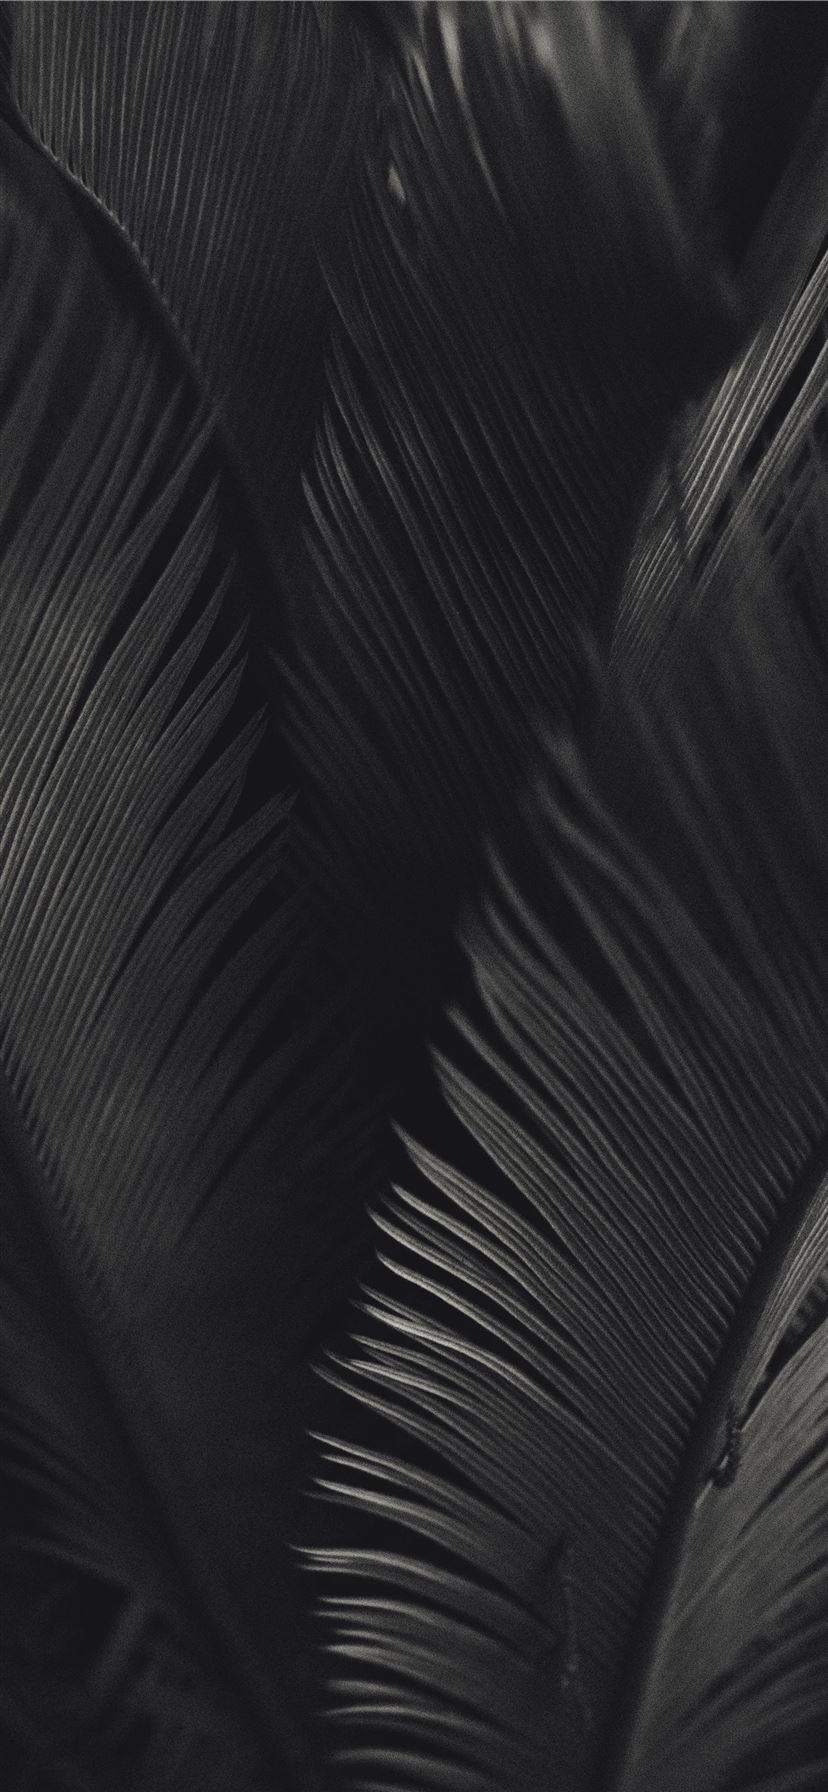 Black And White Palm Tree Wallpapers